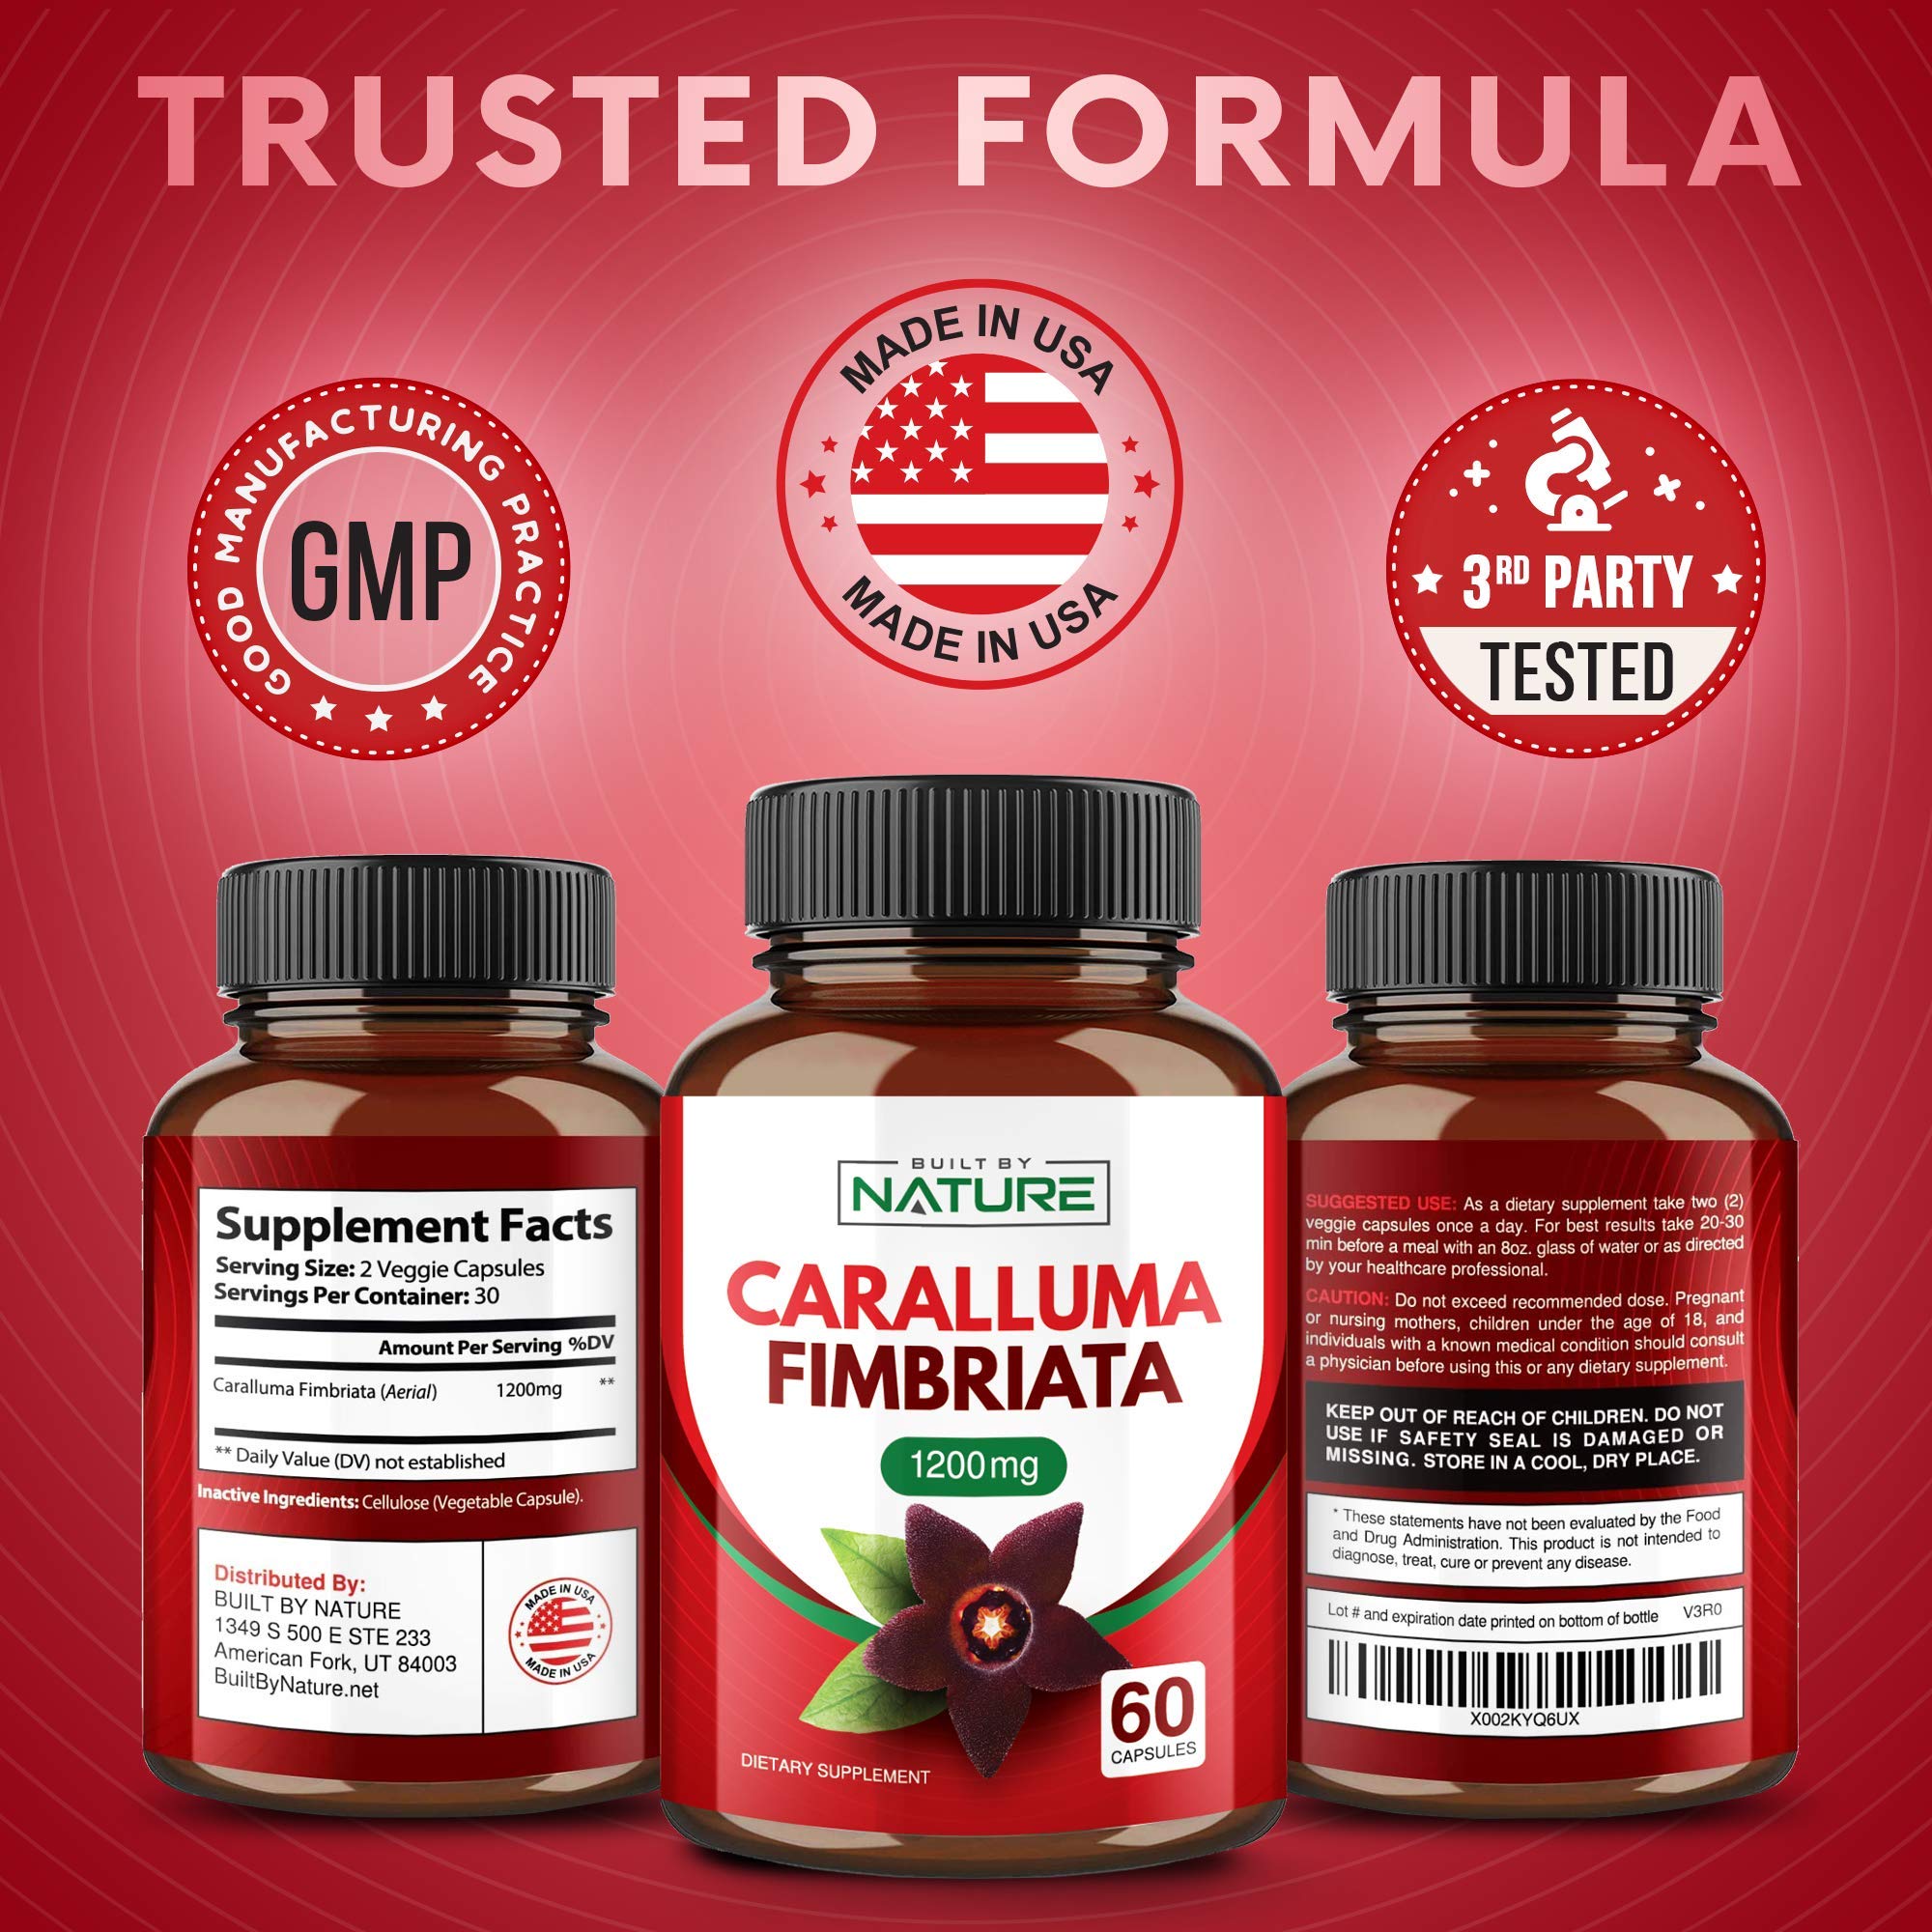 Caralluma Fimbriata Extract, 1200mg Maximum Strength Appetite Suppressant - Pure & Natural Weight Loss, Energy, and Mental Focus Support, Gluten-Free, Vegan, No Additives or Fillers, 60 Capsules